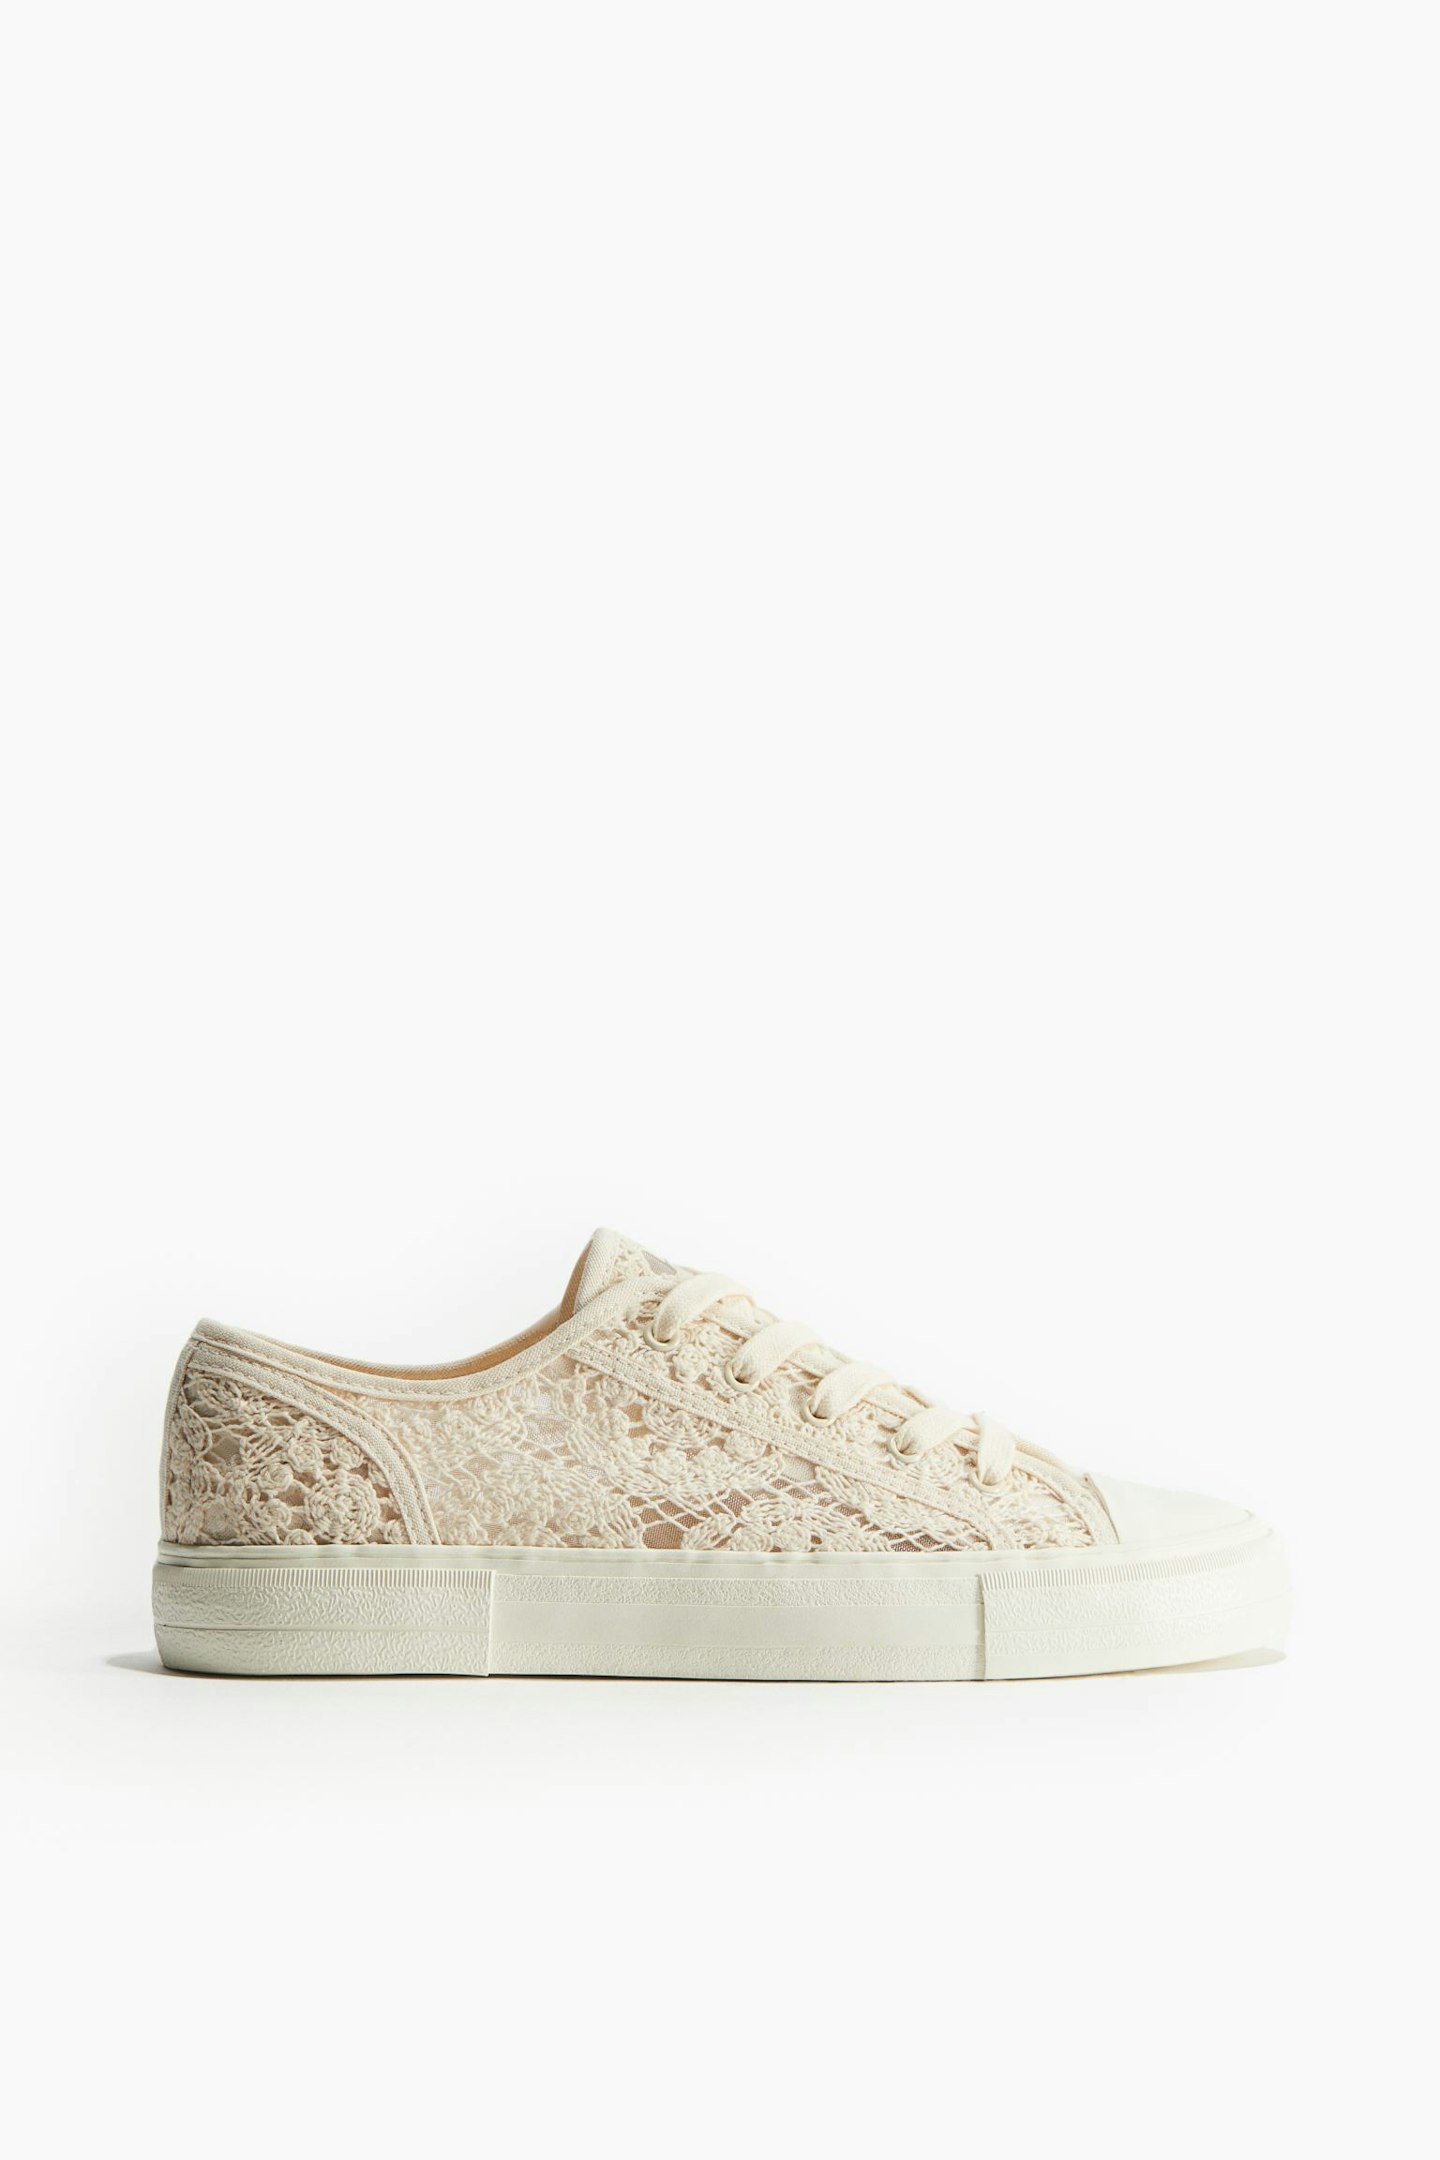 H&M Embroidered Trainers